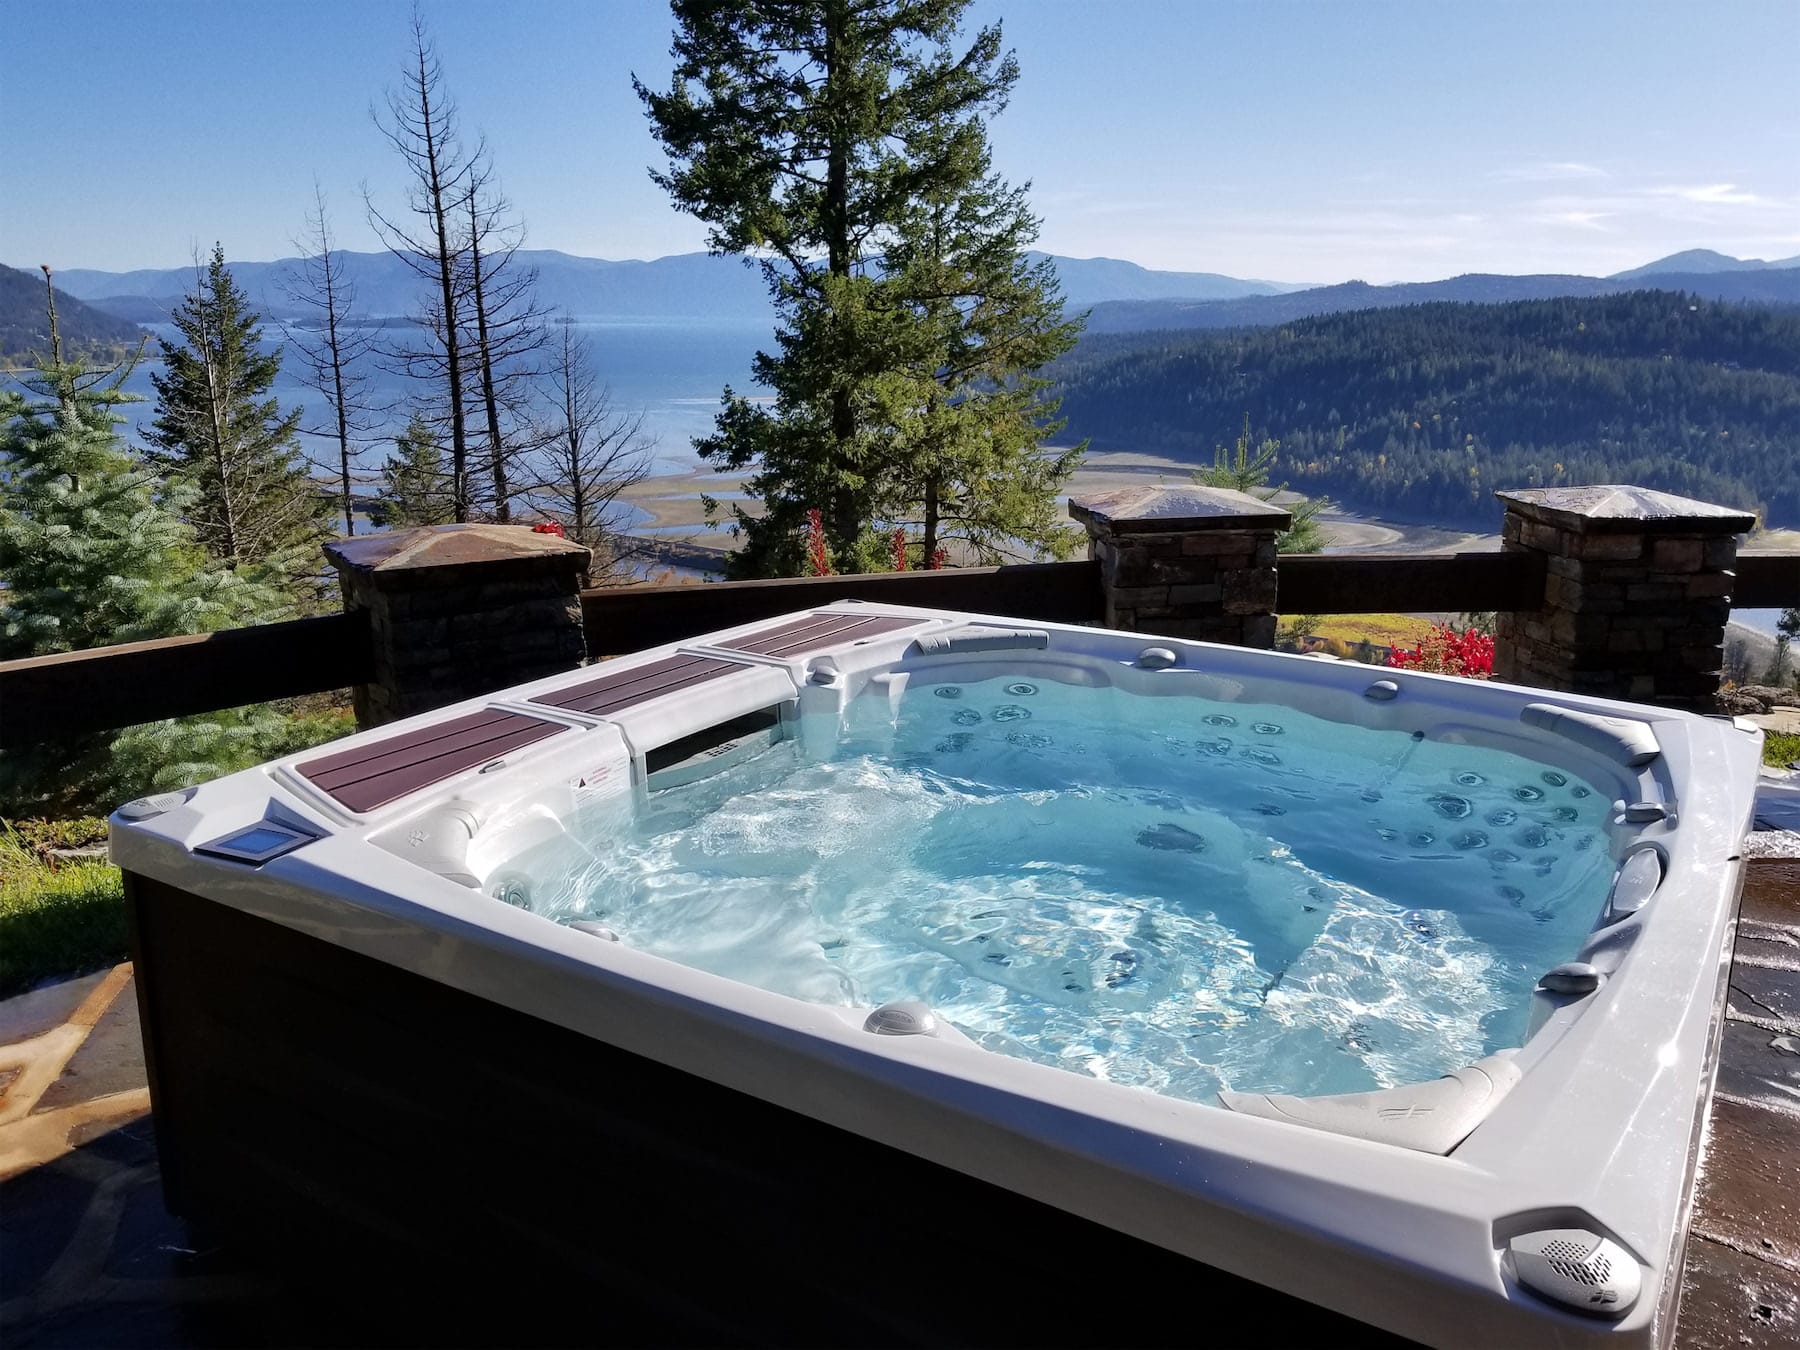 5 Best Hot Tub Exercises You Should TryImage